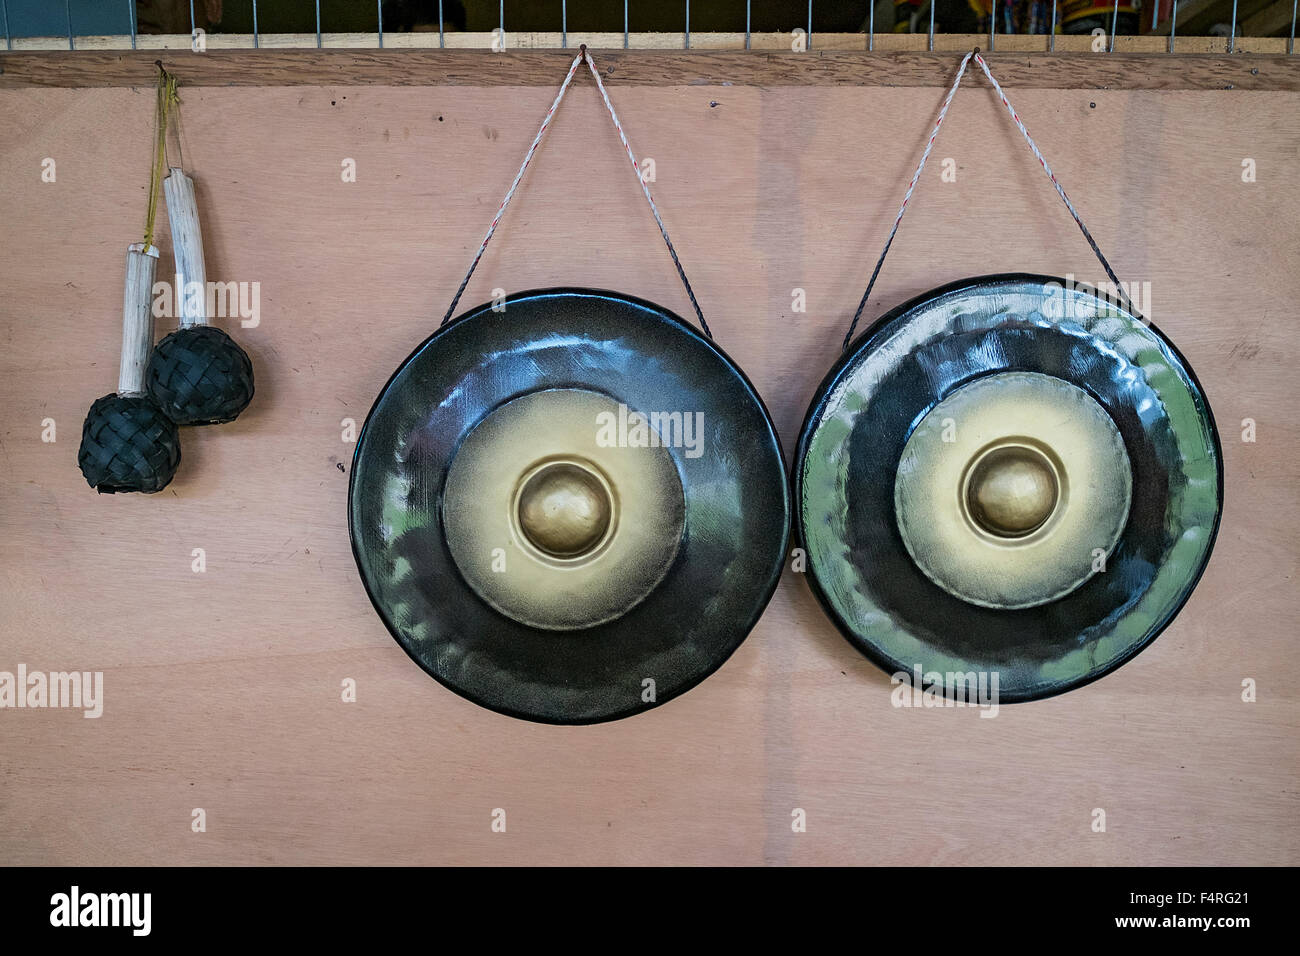 Traditional gongs for sale on display during Sunday market at the village in Kudat Sabah, Borneo, Malaysia Stock Photo